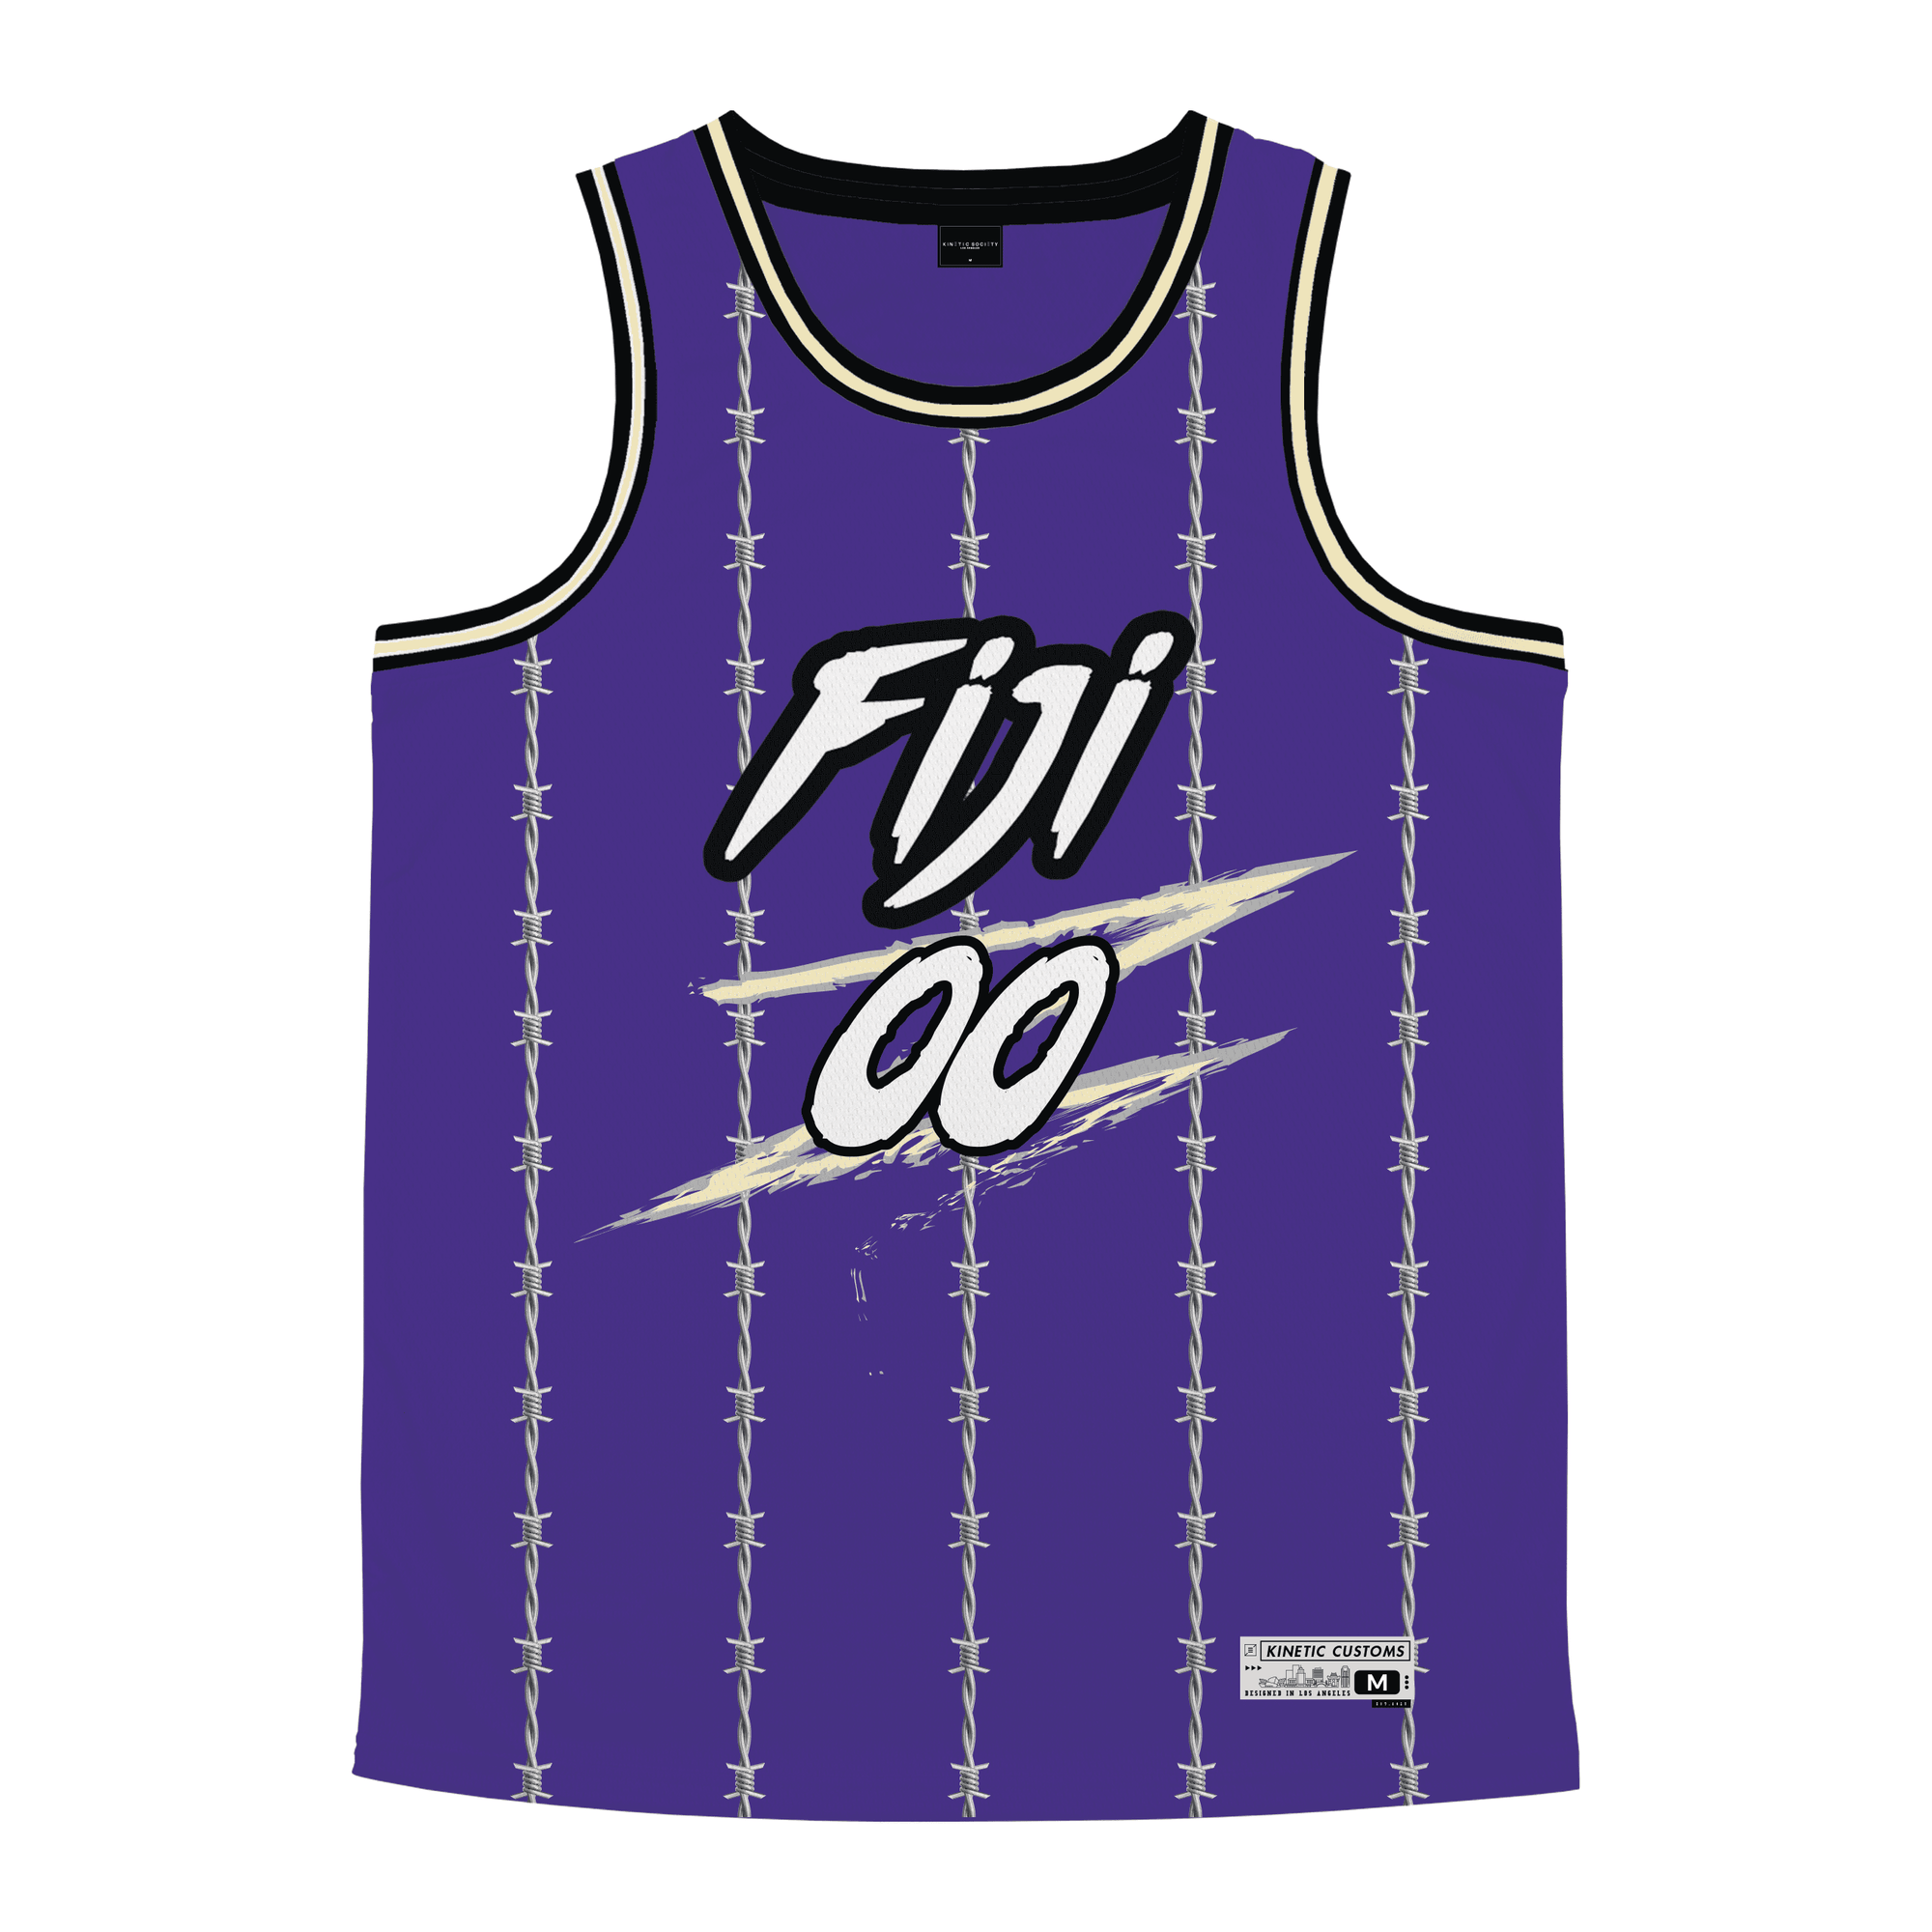 Phi Gamma Delta - Barbed Wire Basketball Jersey